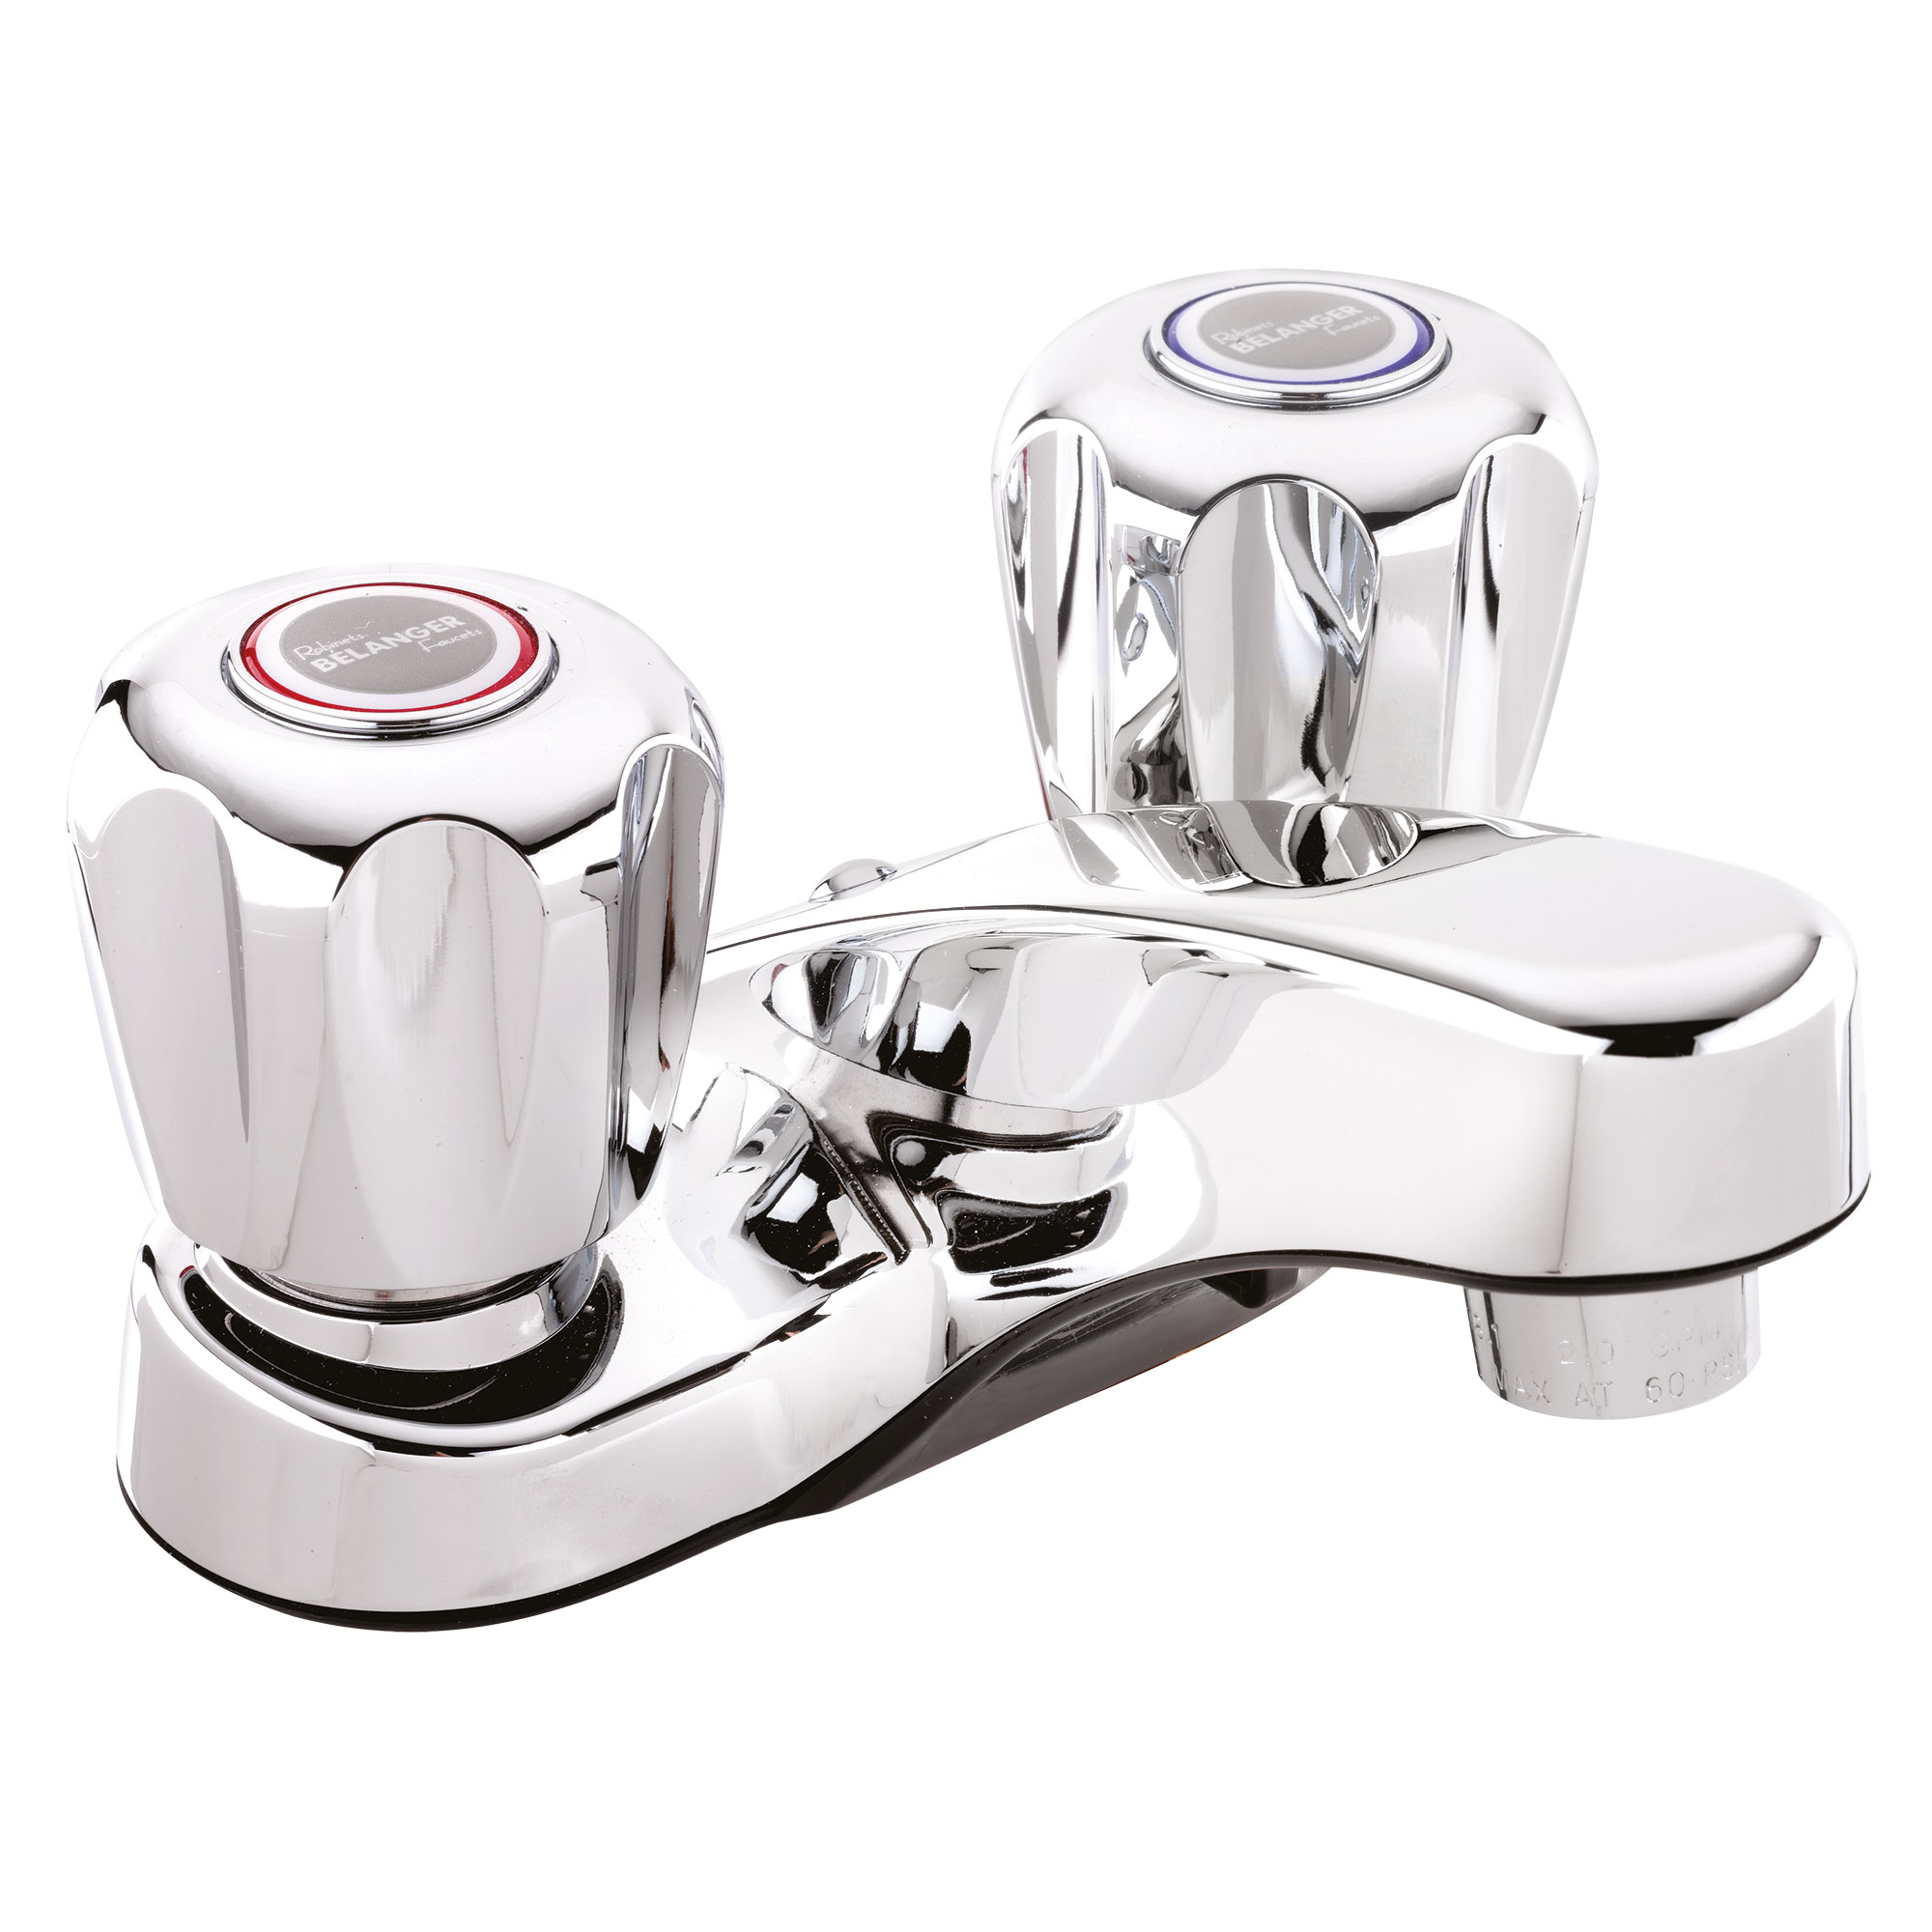 3063 5.13 X 7 X 5.5 In. Bathroom Sink Faucet With 2 Handles & 4 In. Centerset, Polished Chrome